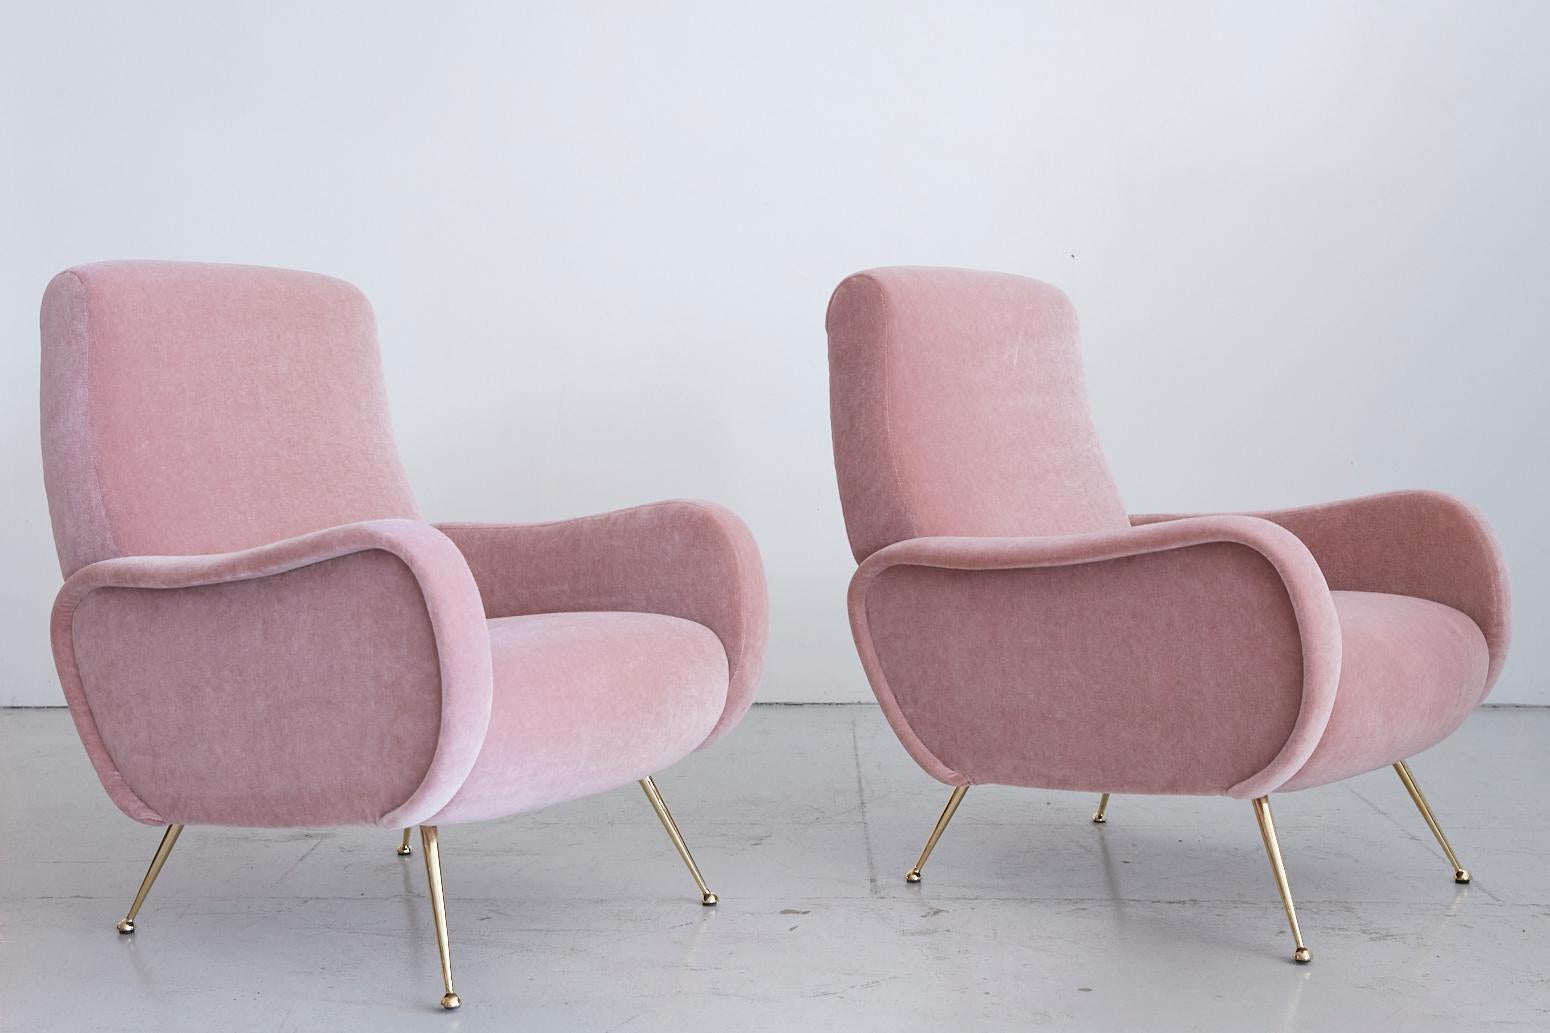 Stunning pair of Italian chairs in the style of the Marco Zanuso lady chair. Newly upholstered in a pink mohair with beautiful sculptural curved shape and newly polished brass tapered legs.